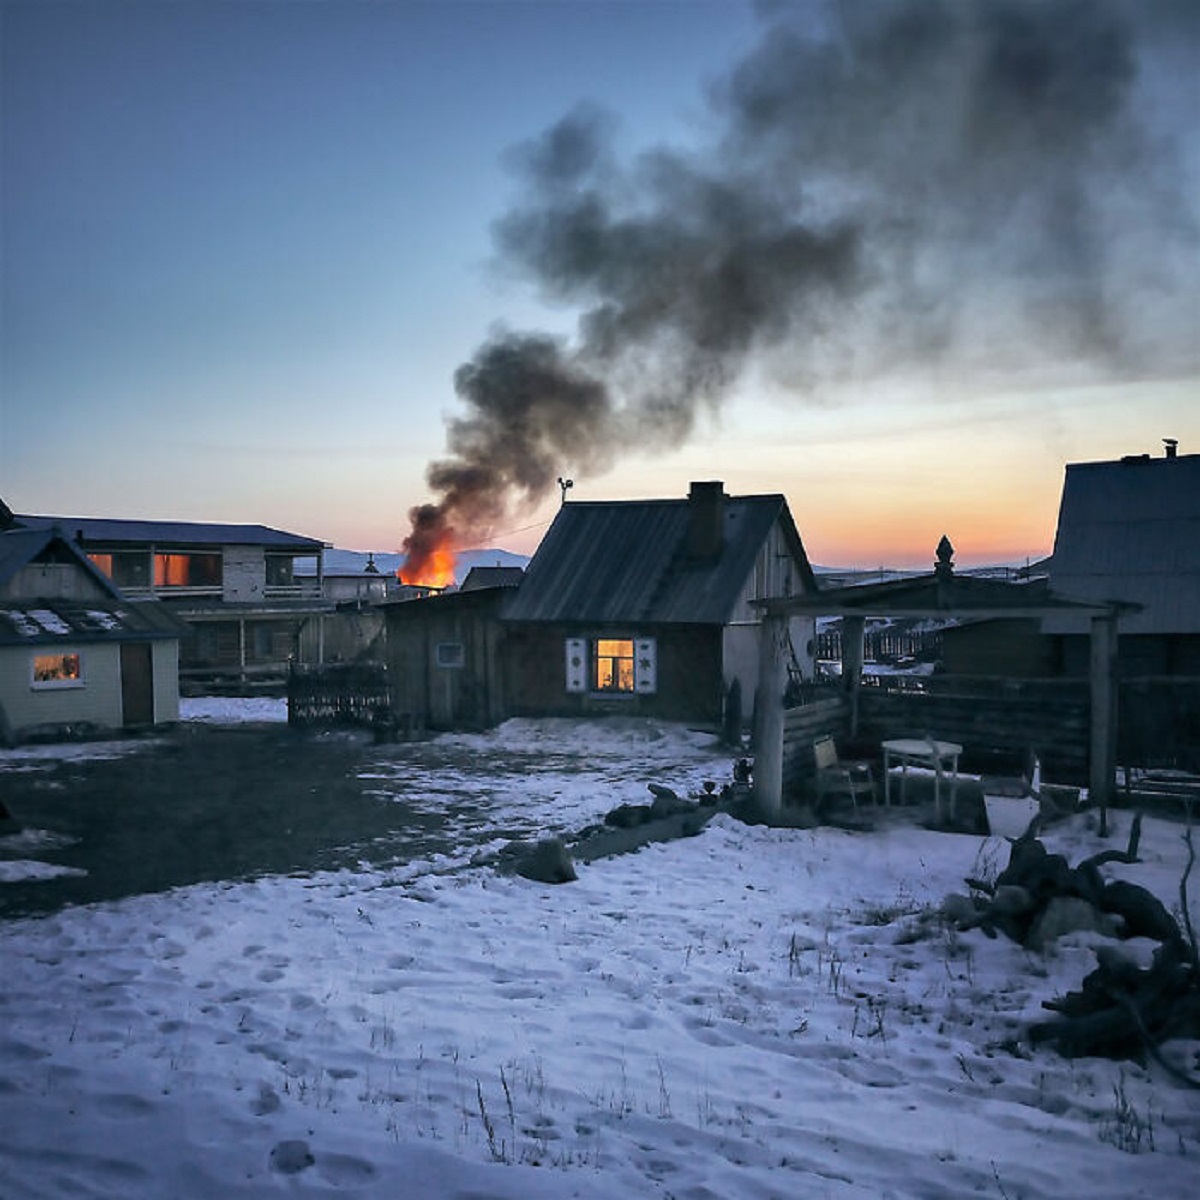 that 30 years ago you had 15-17 minutes to escape a house fire. Nowadays you only have 3-5 minutes (due to more plastics & petroleum-based products in the house as well as more open floor plans, bigger rooms, & higher ceilings).